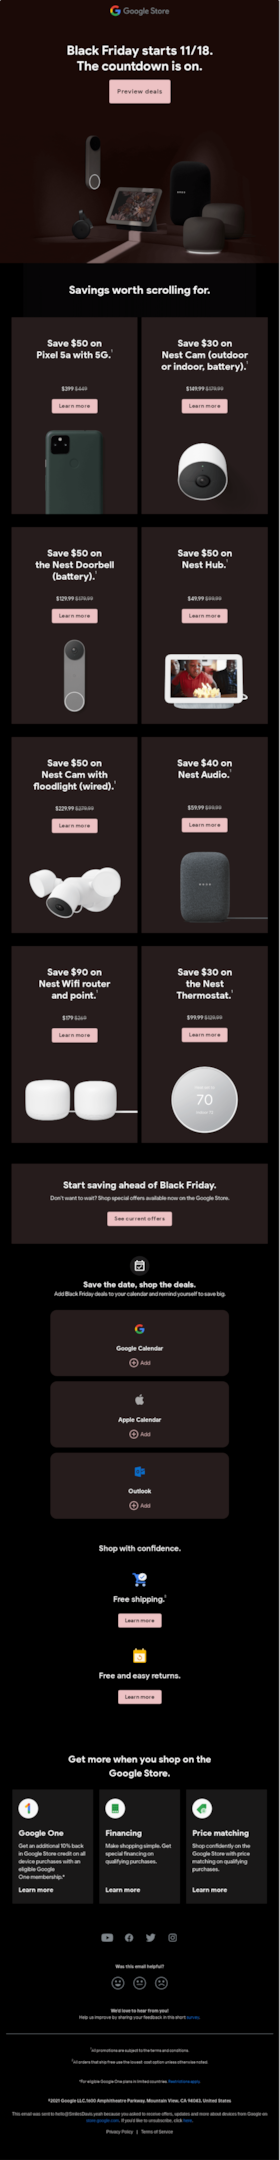 Google Store Black Friday Cross Sellling Email Example